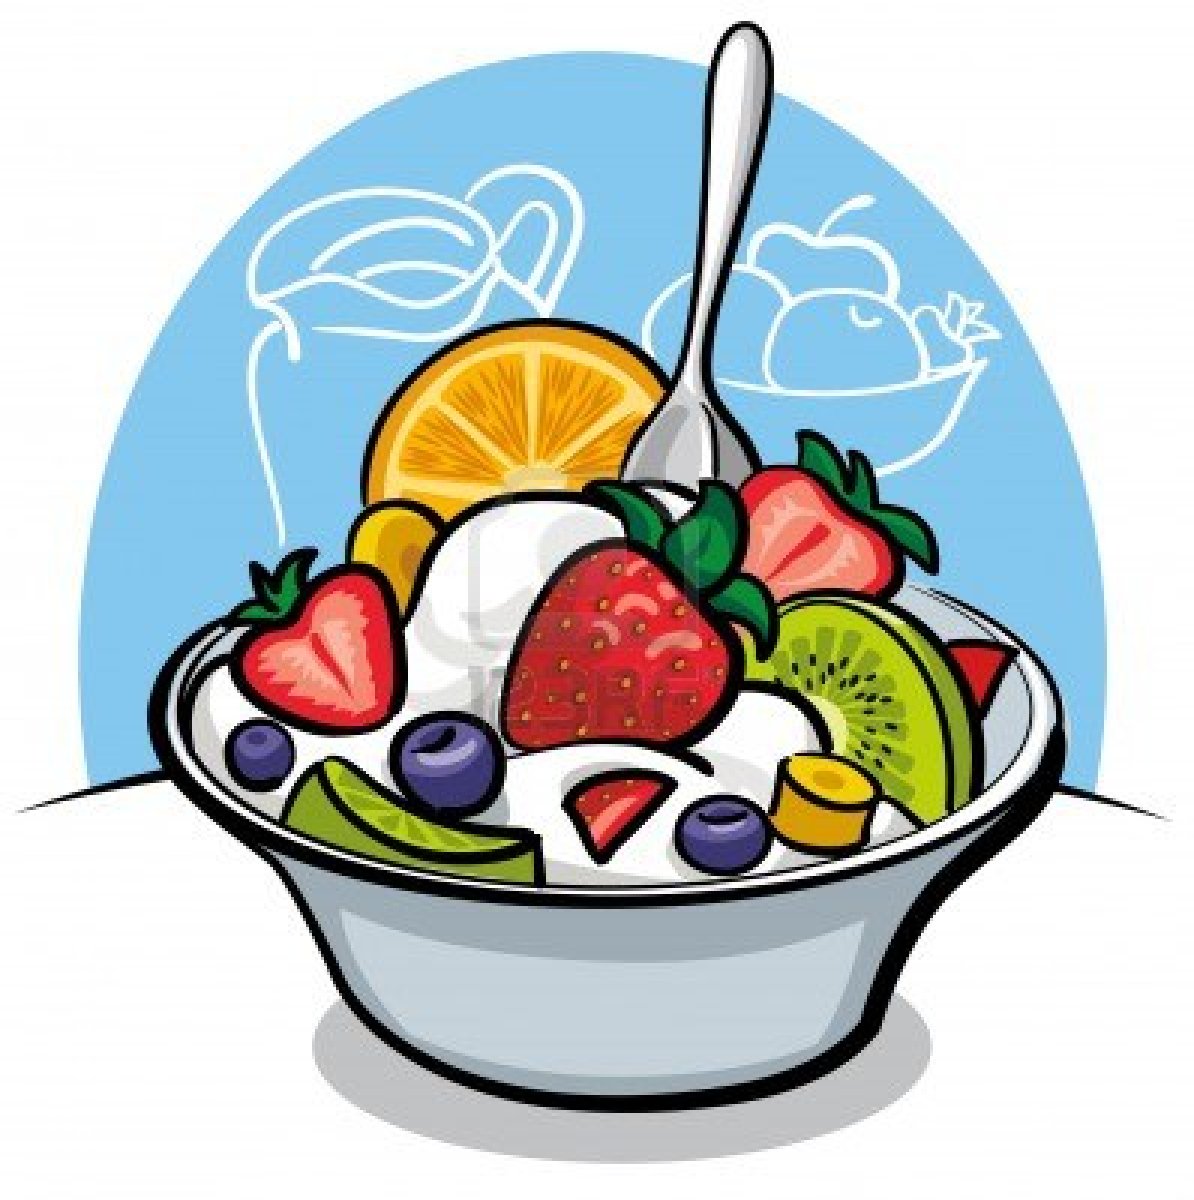 Fruit Salad Clipart Black And White | Clipart library - Free Clipart 